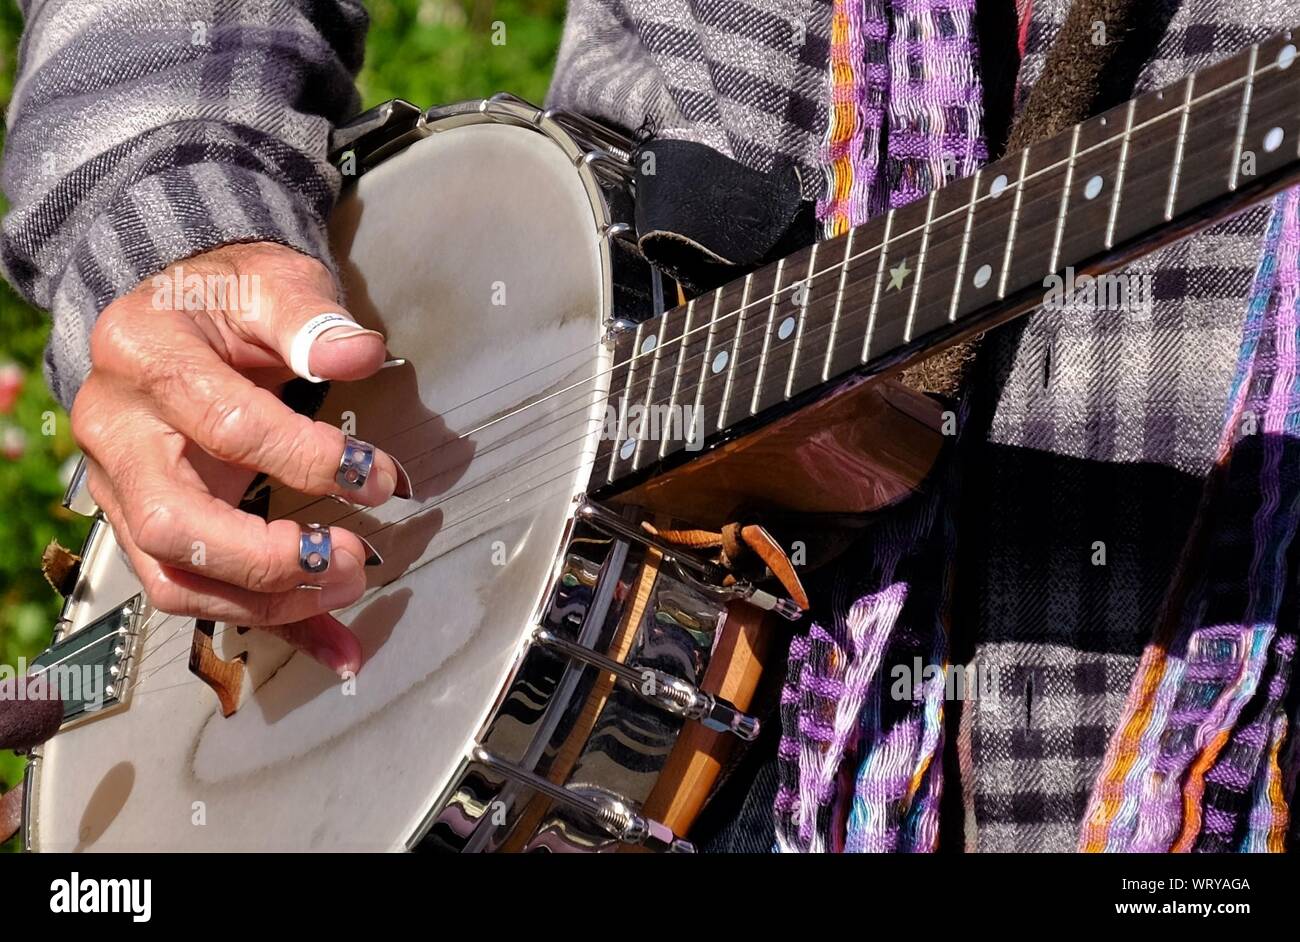 Midsection Of Man Playing Banjo With Fingerpicks Stock Photo